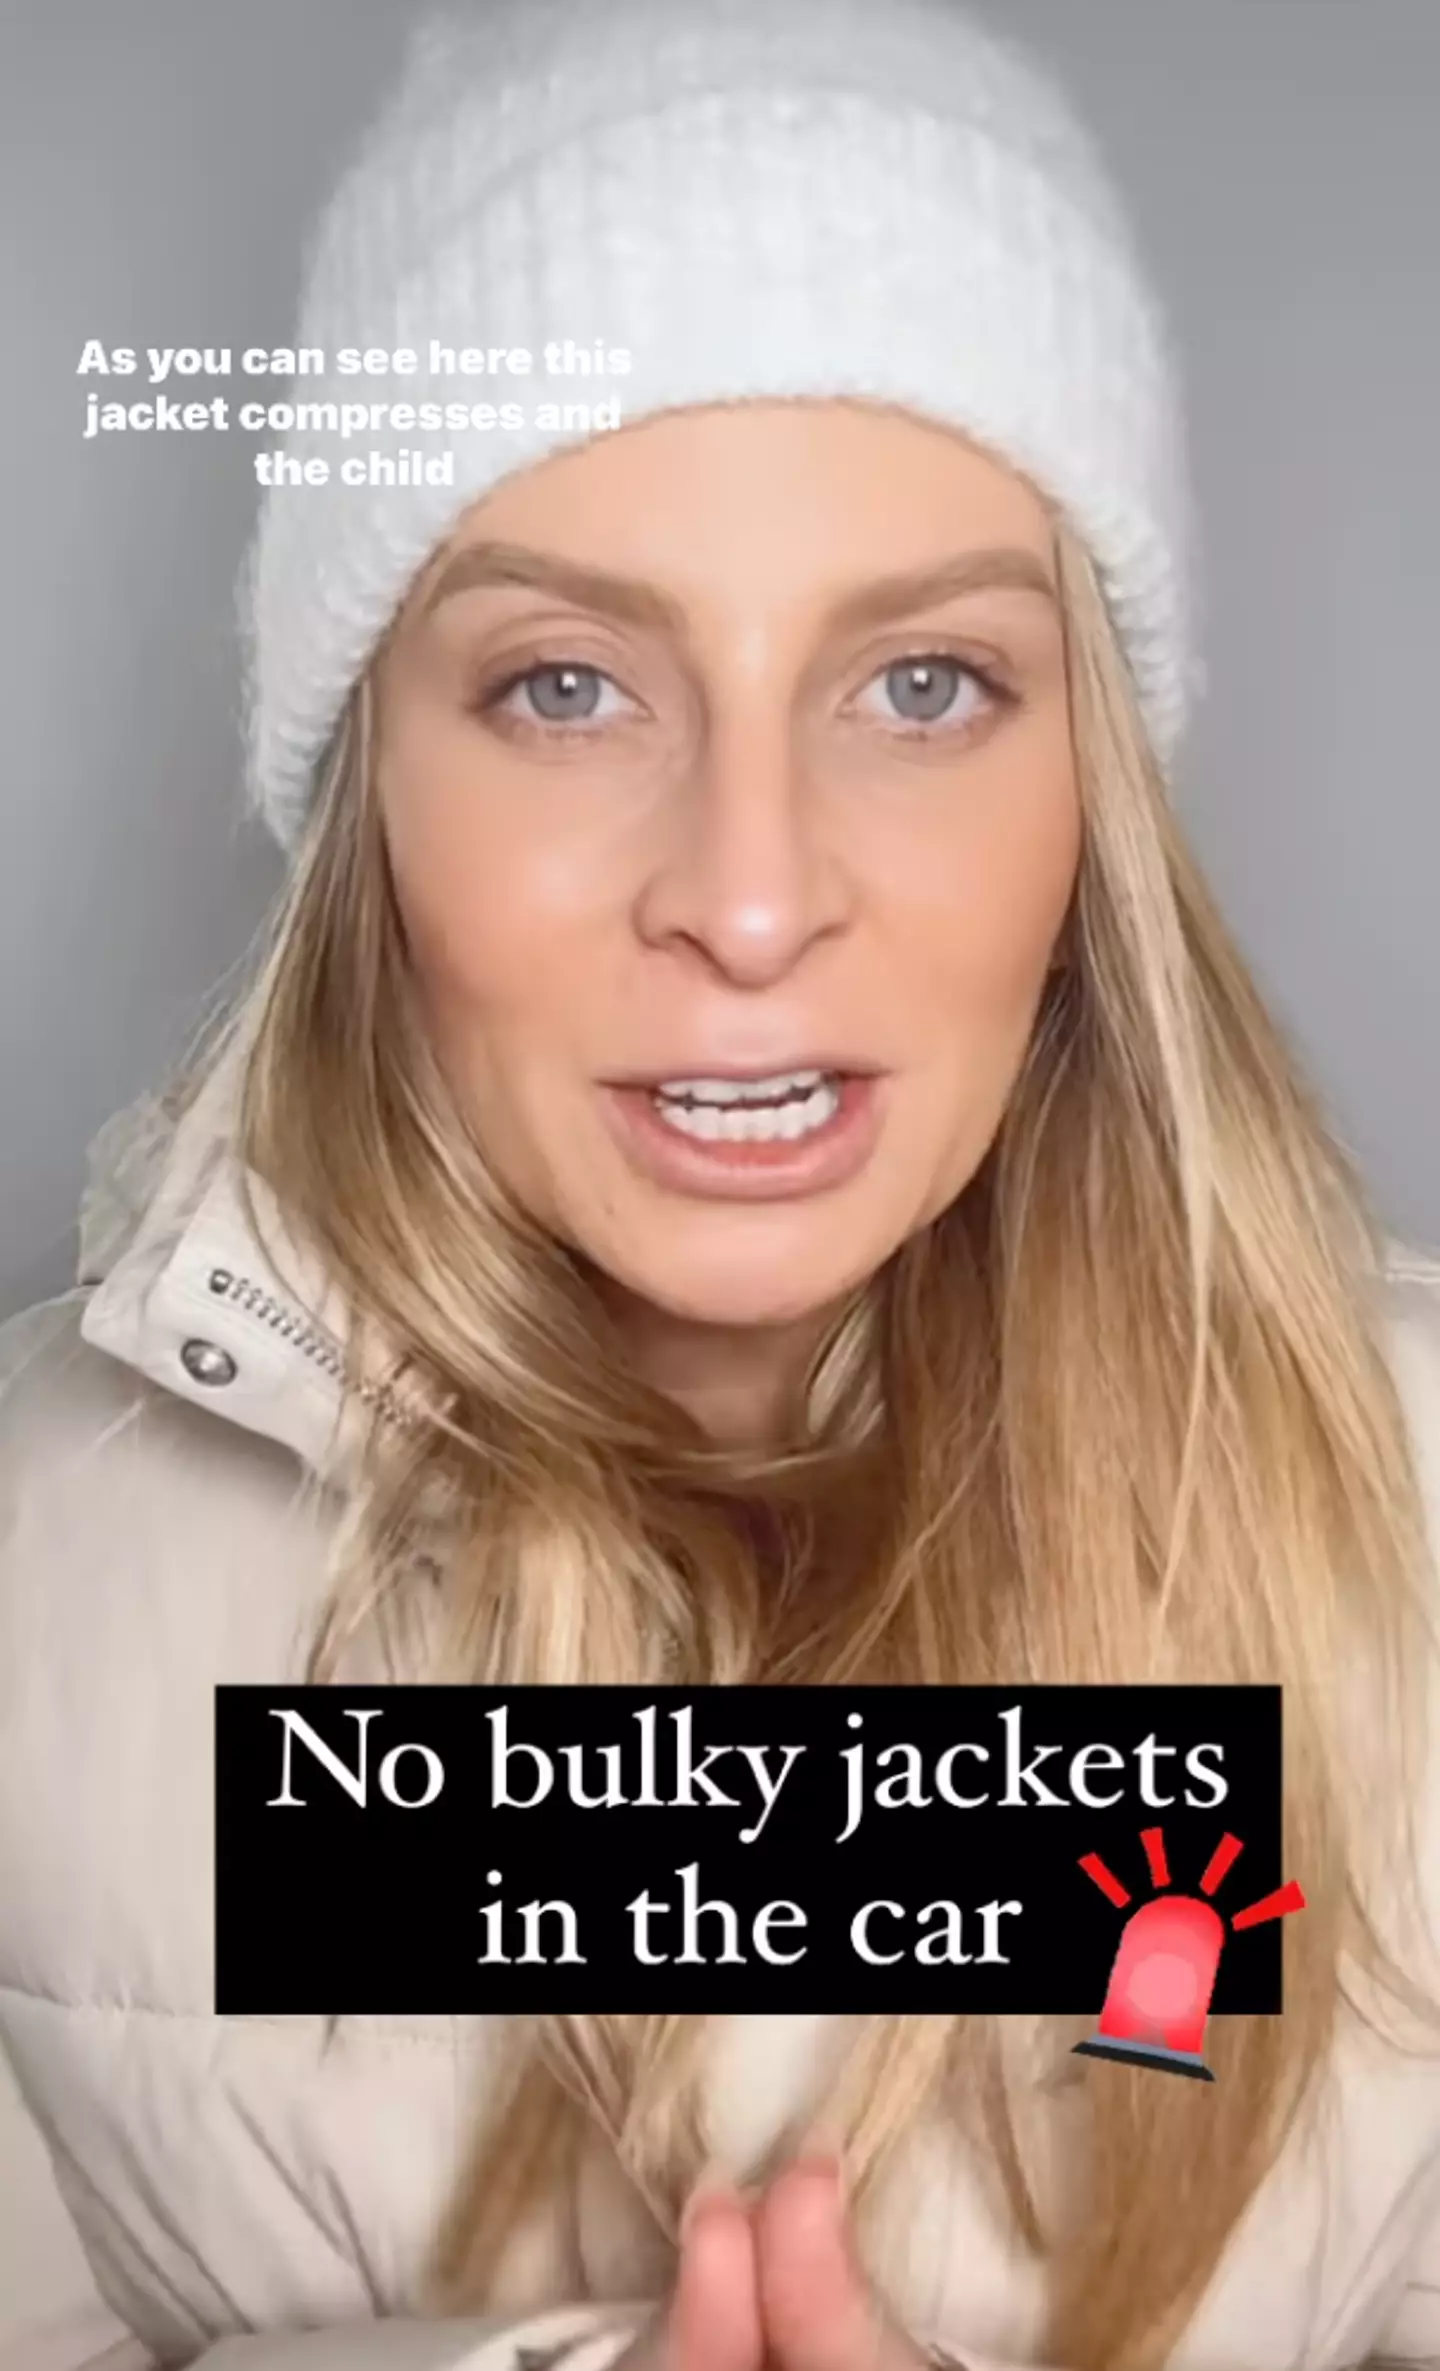 The mum warns against letting your child wear a large jacket when strapped into a car seat.